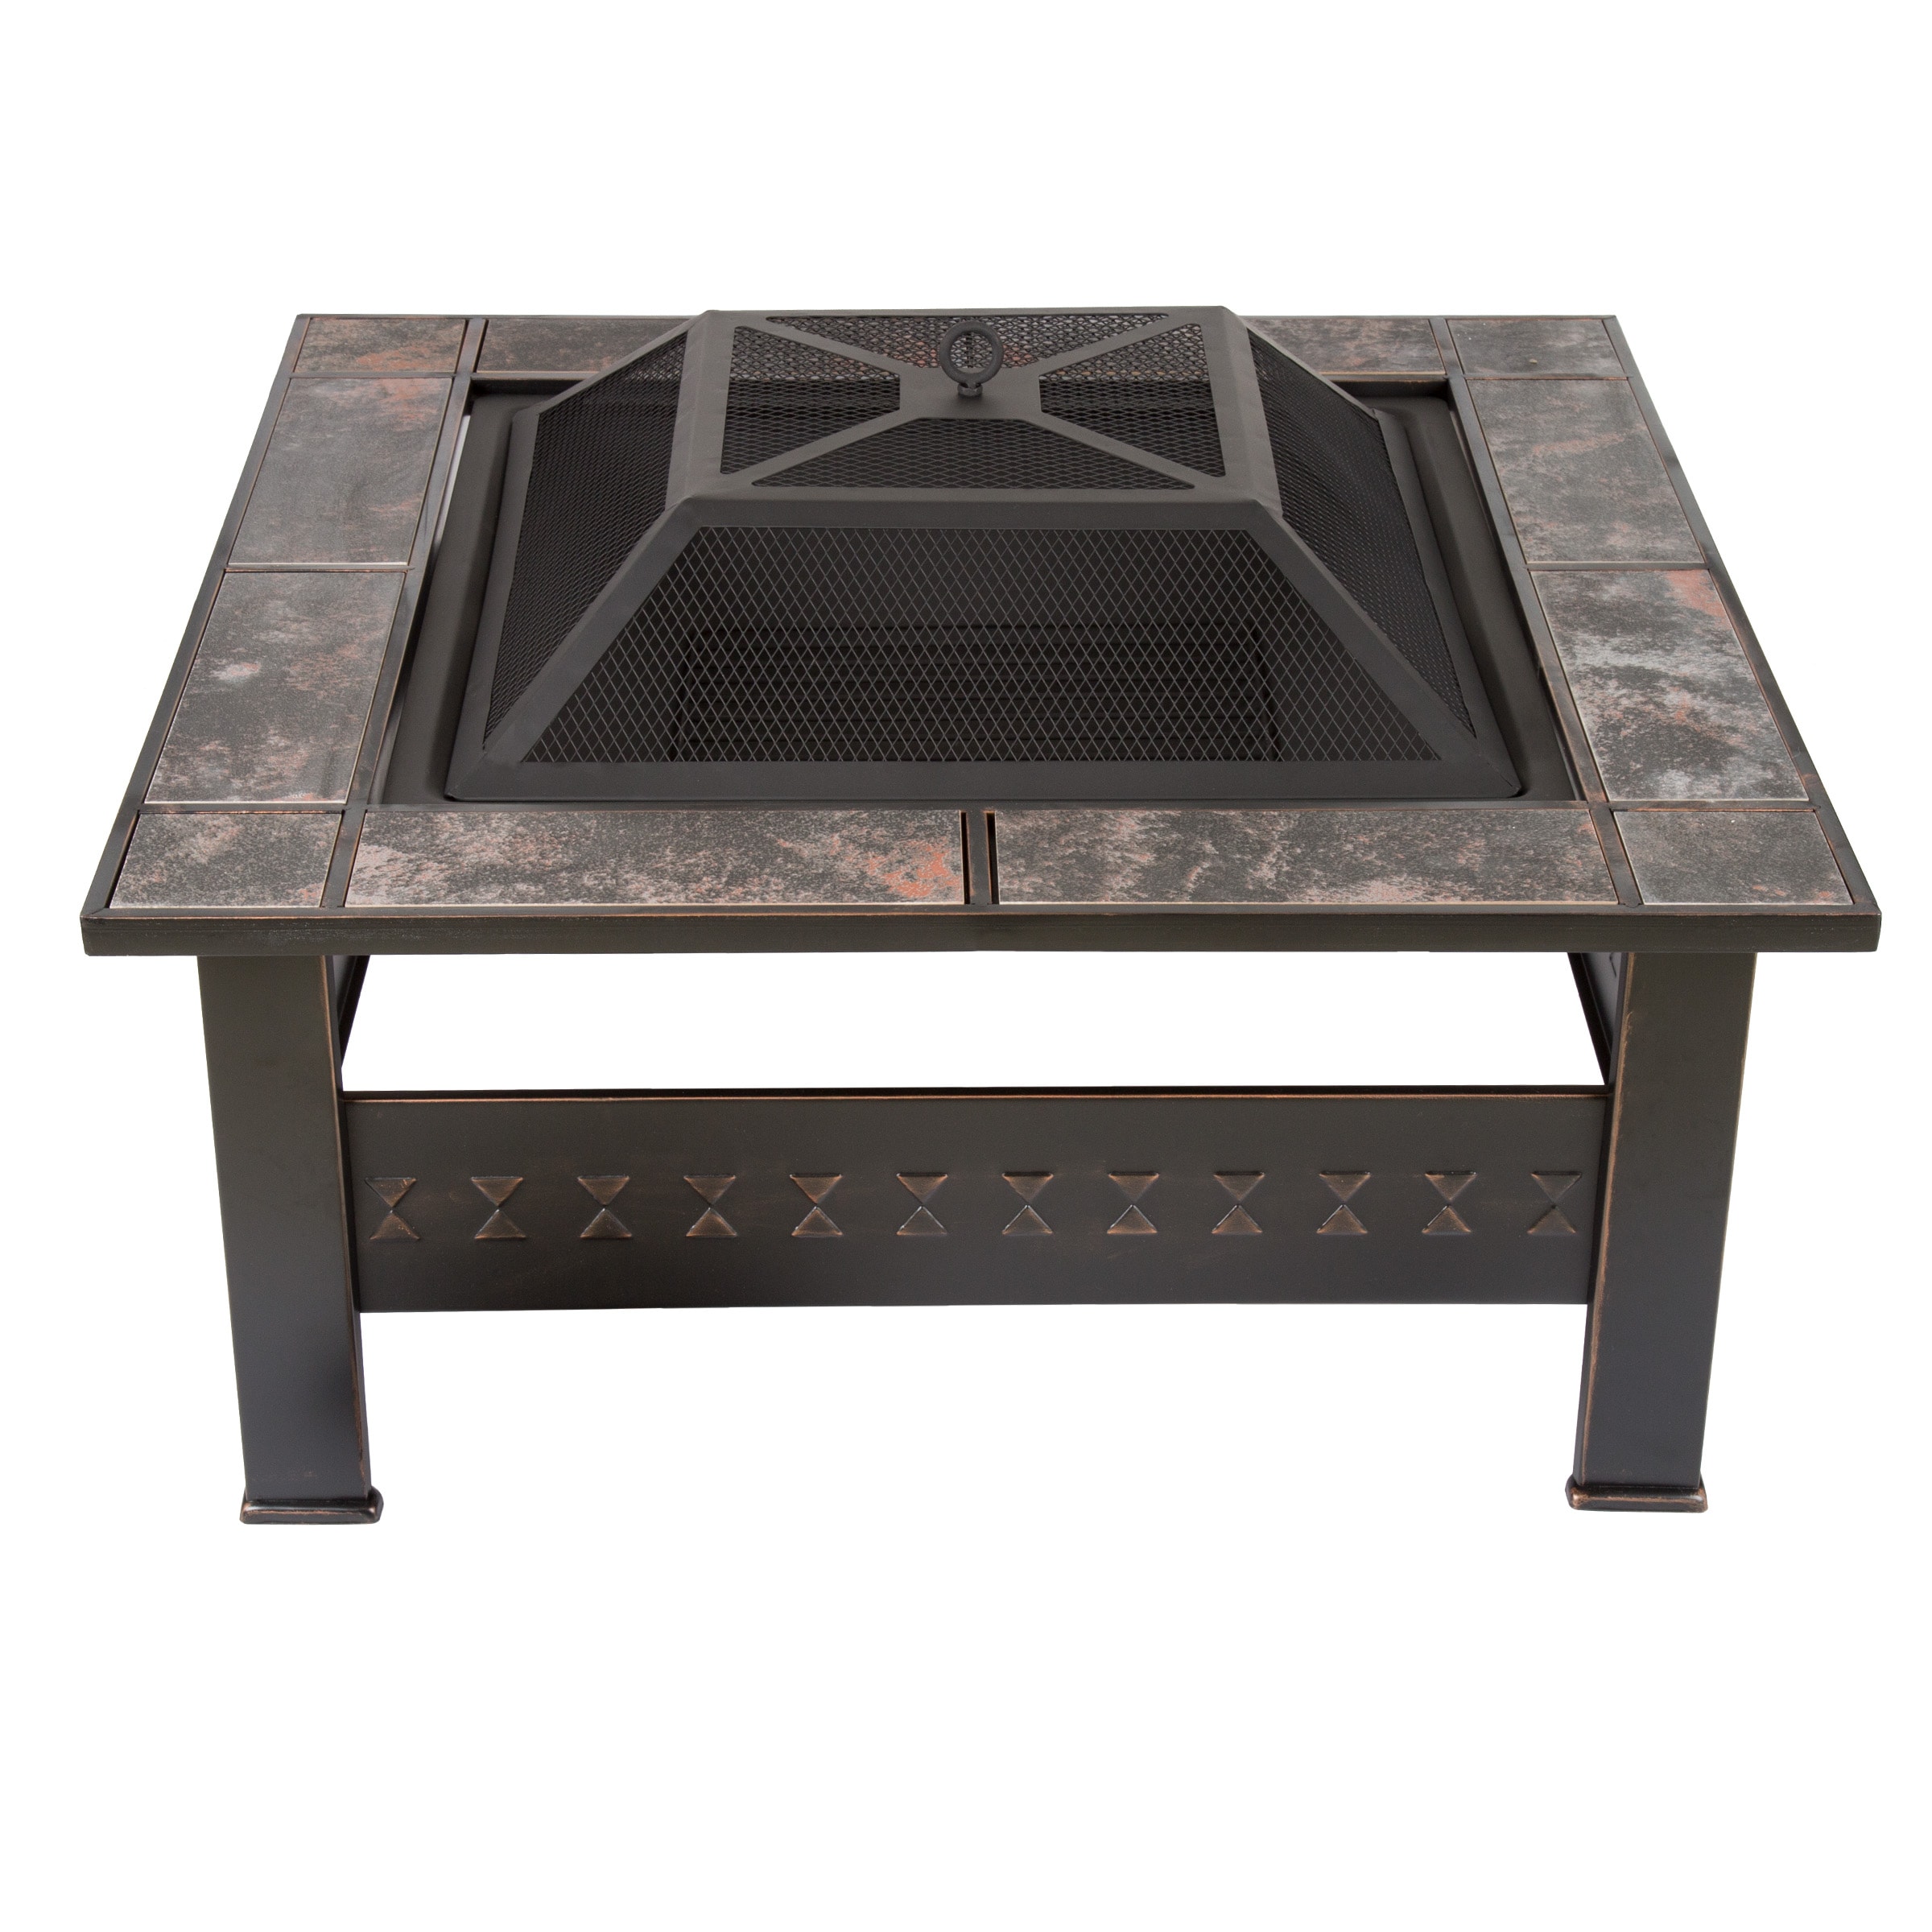 Brown Steel Wood Burning Fire Pit, Square Wood Burning Fire Pit